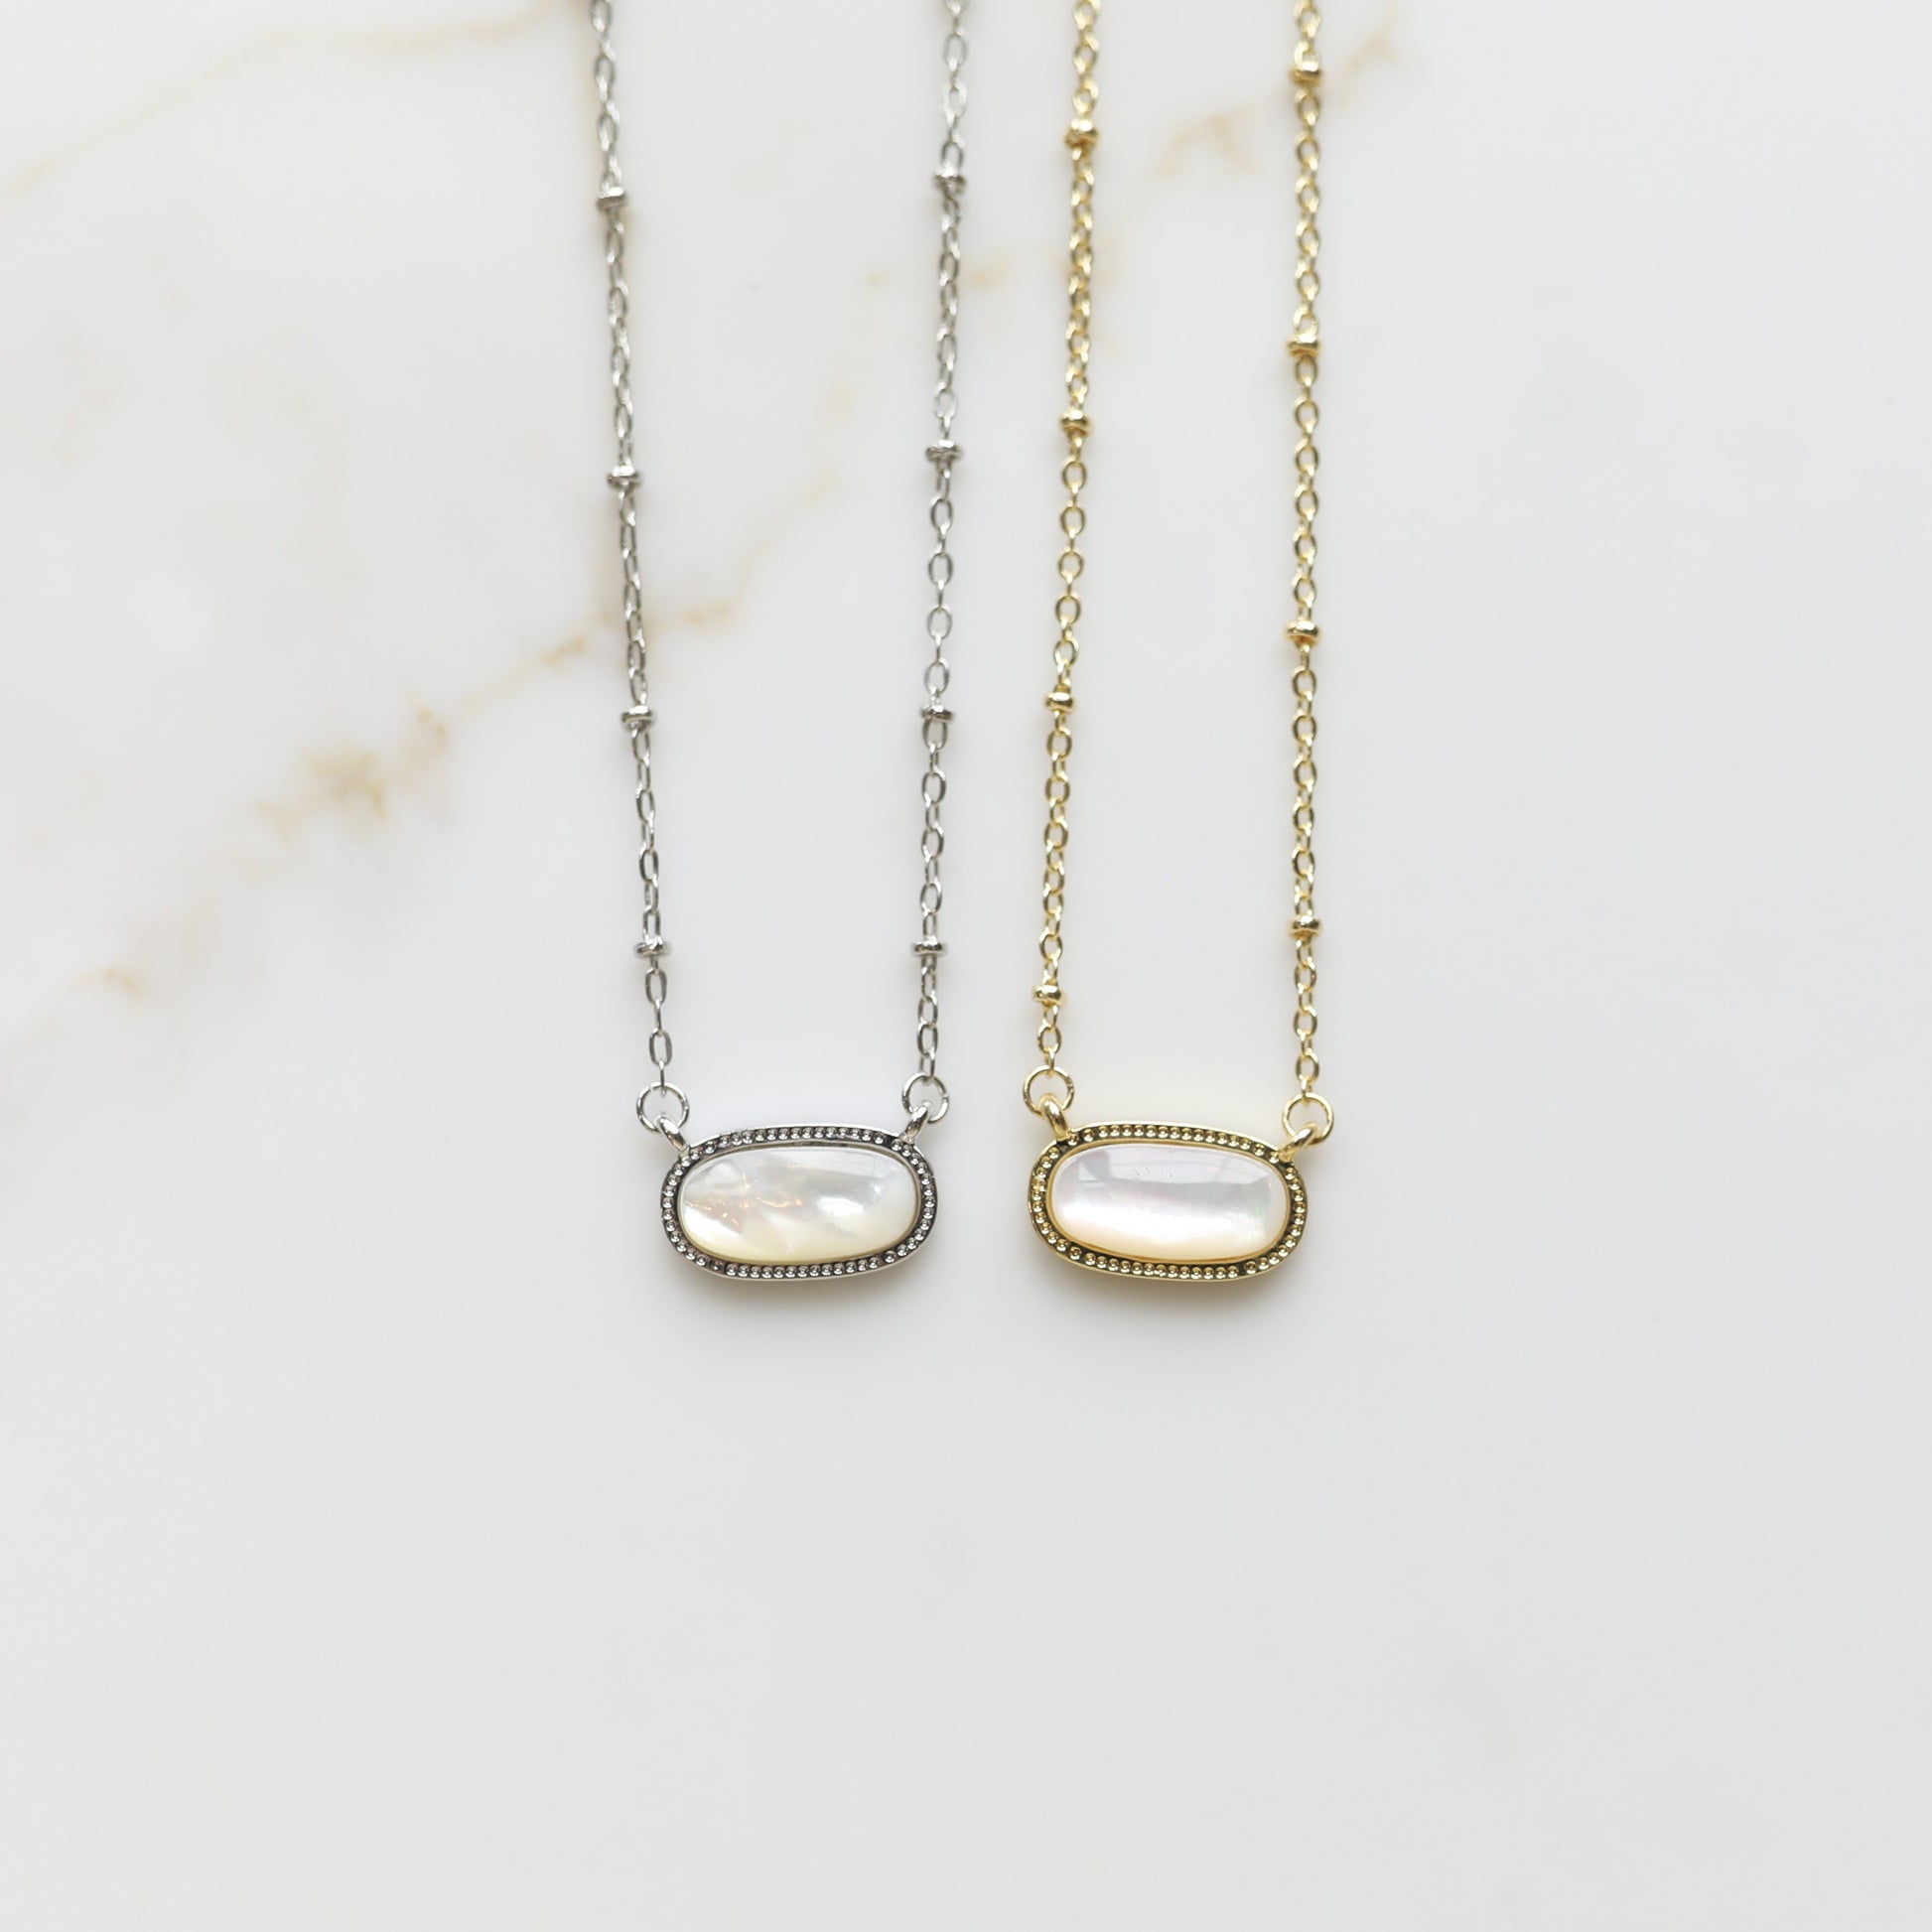 Meaningful Gemstone Necklace in Mother of Pearl White available with a Gold or Silver chain